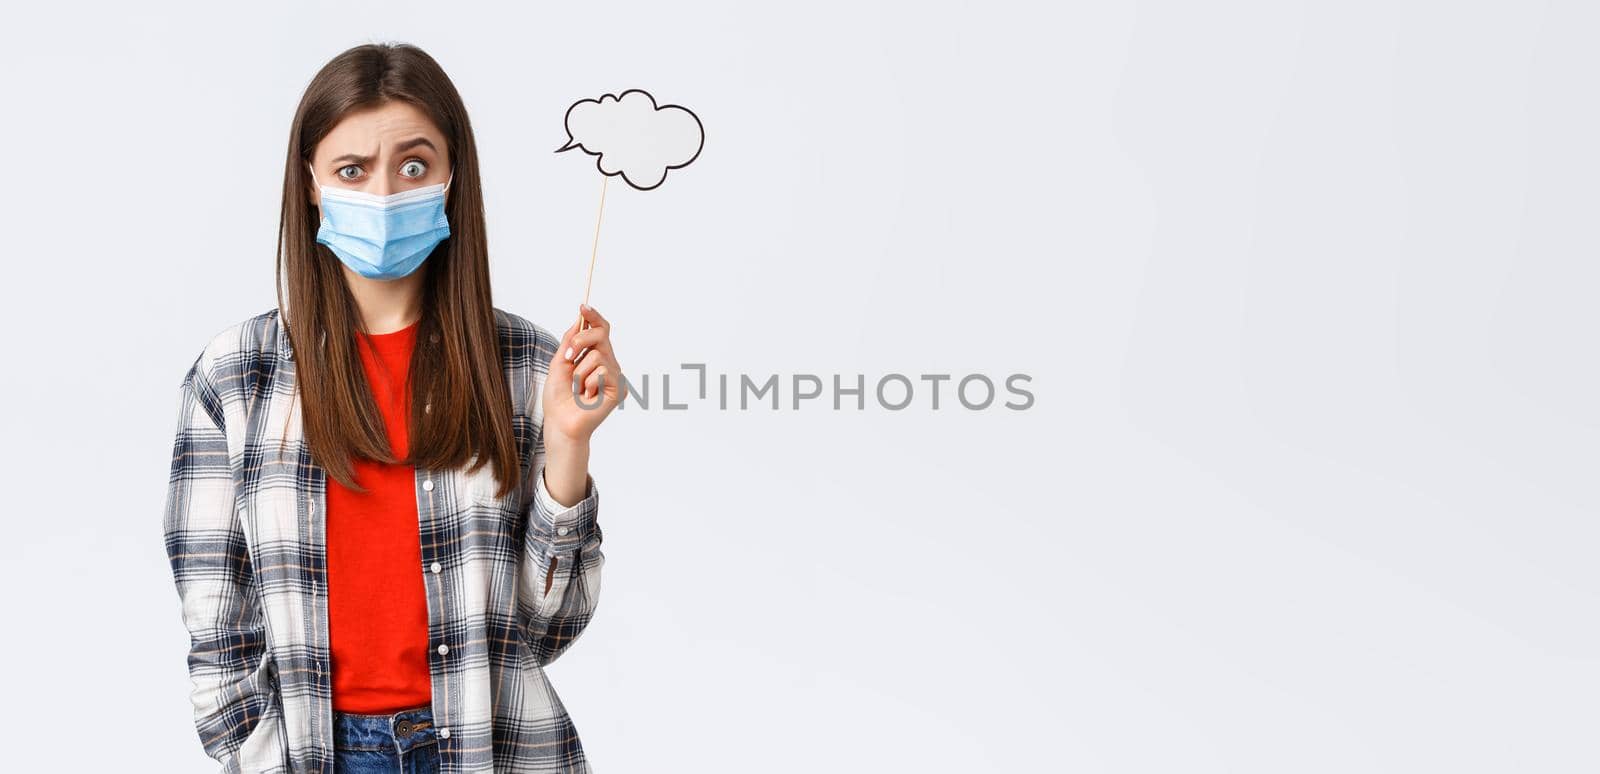 Coronavirus outbreak, leisure on quarantine, social distancing and emotions concept. Confused and clueless young girl in medical mask have no ideas, hold cloud stick near head.